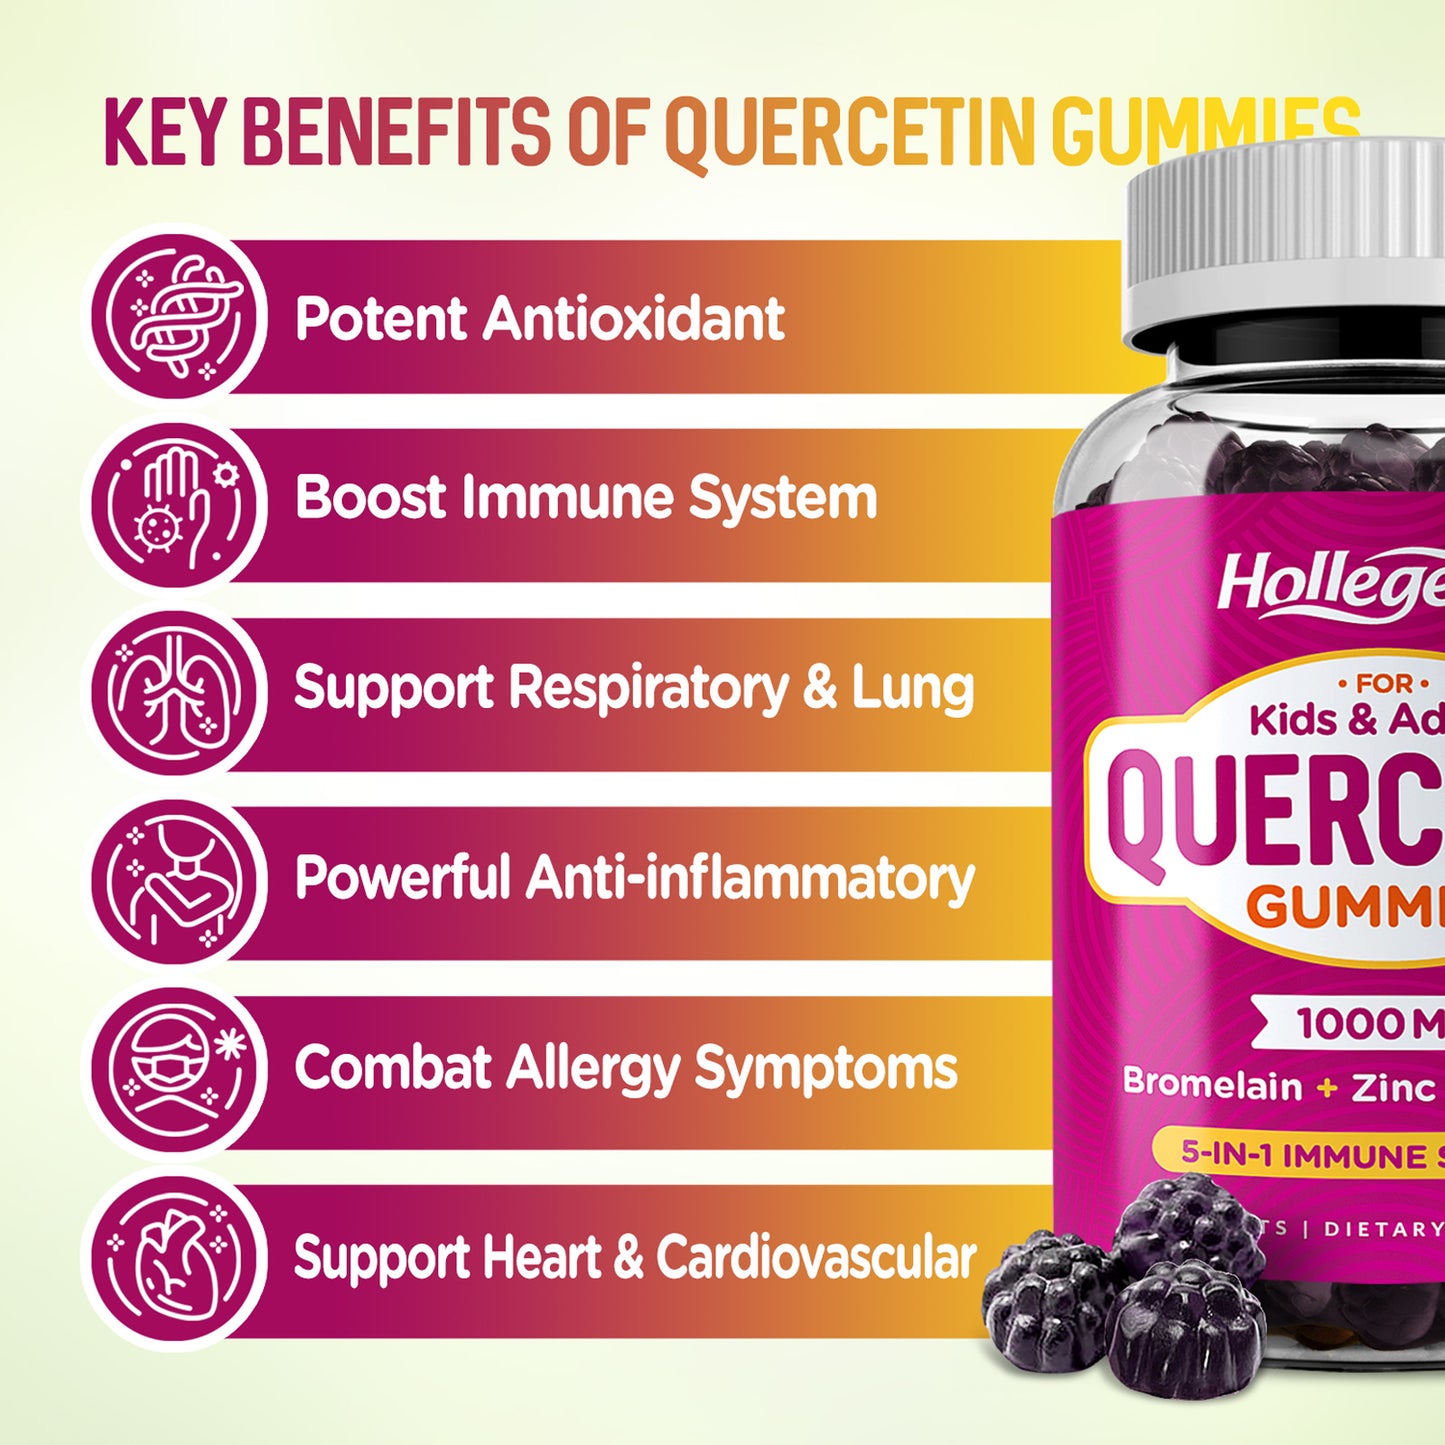 Quercetin Gummies for Kids and Adults, 1000mg Quercetin with Bromelain Vitamin C Zinc and Elderberry Supplement Organic, Chewable Gummies Vegan for Immunity Allergy Support, 60 Count